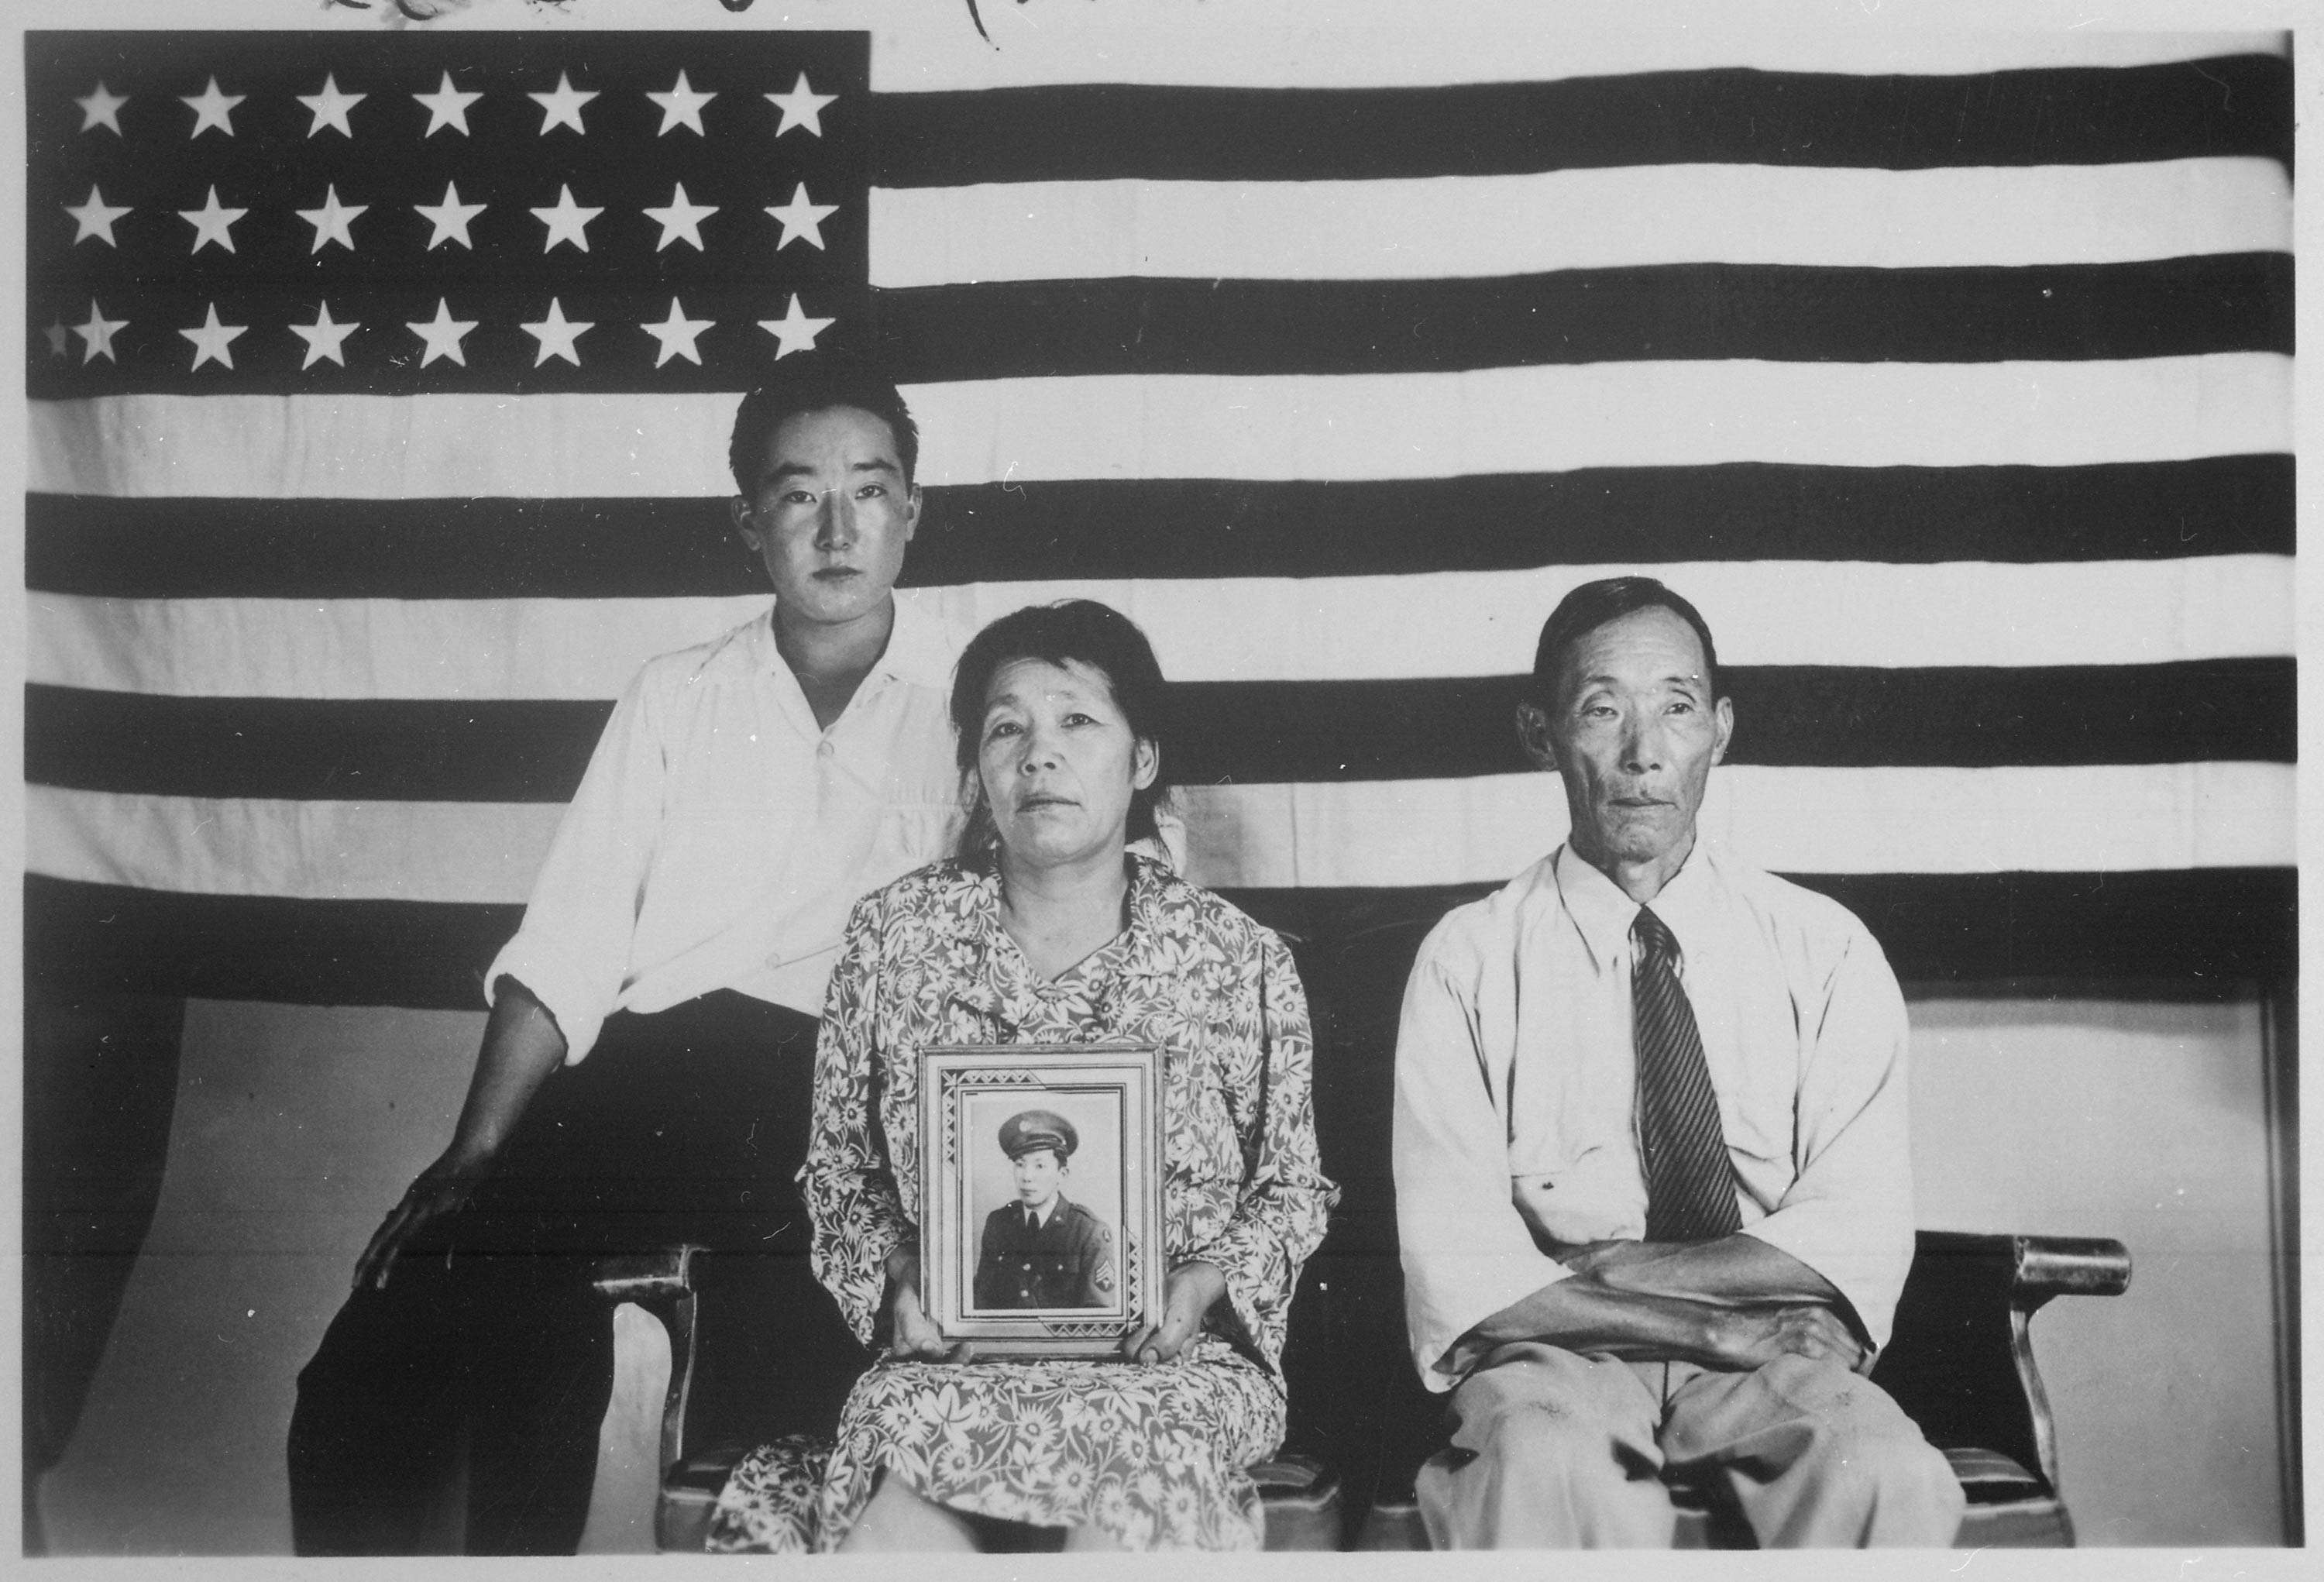 Japanese Americans posing in front of American flag with a photo of a serviceman being held